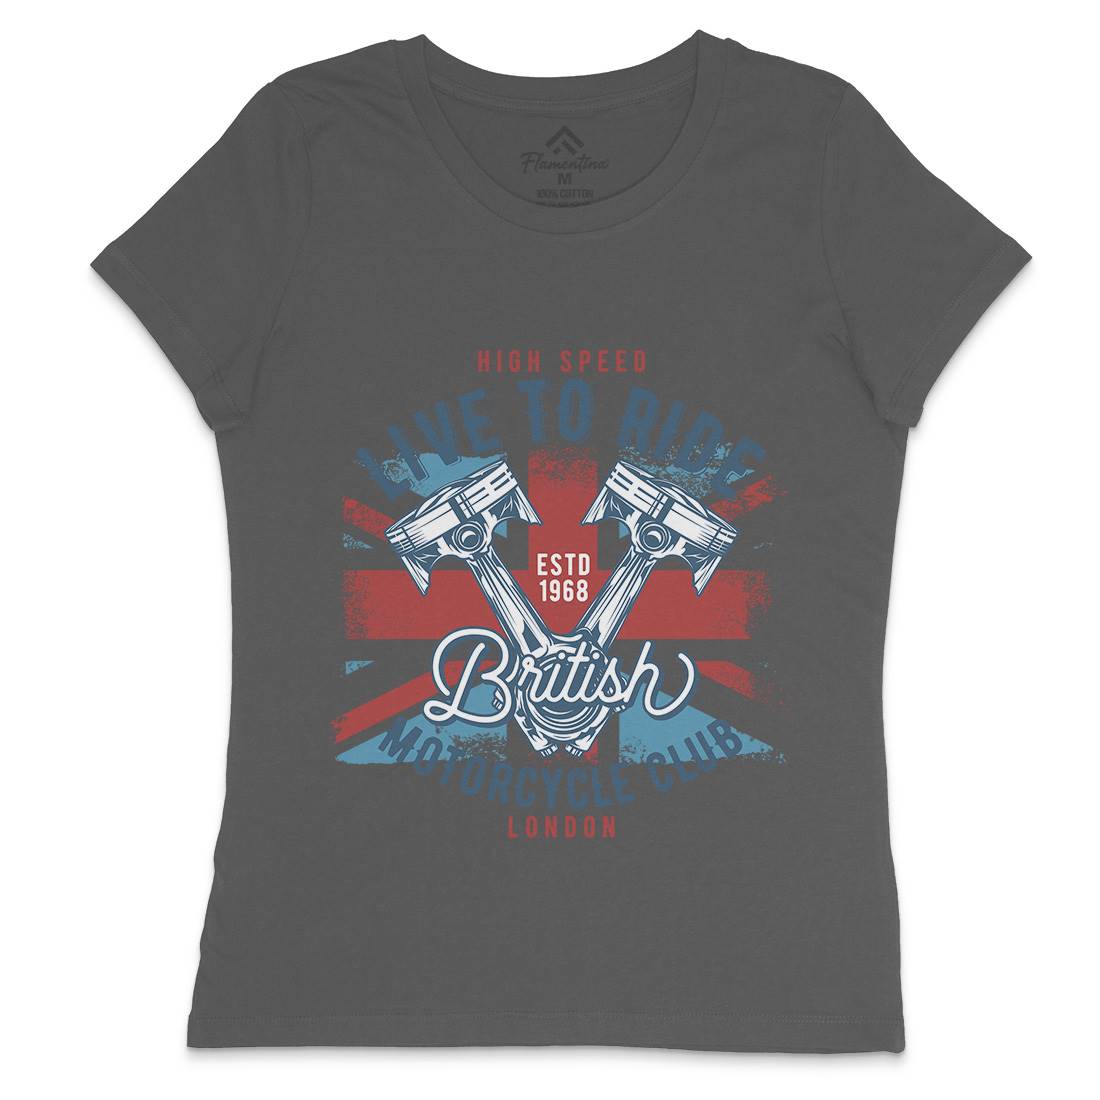 Live To Ride Womens Crew Neck T-Shirt Motorcycles B837